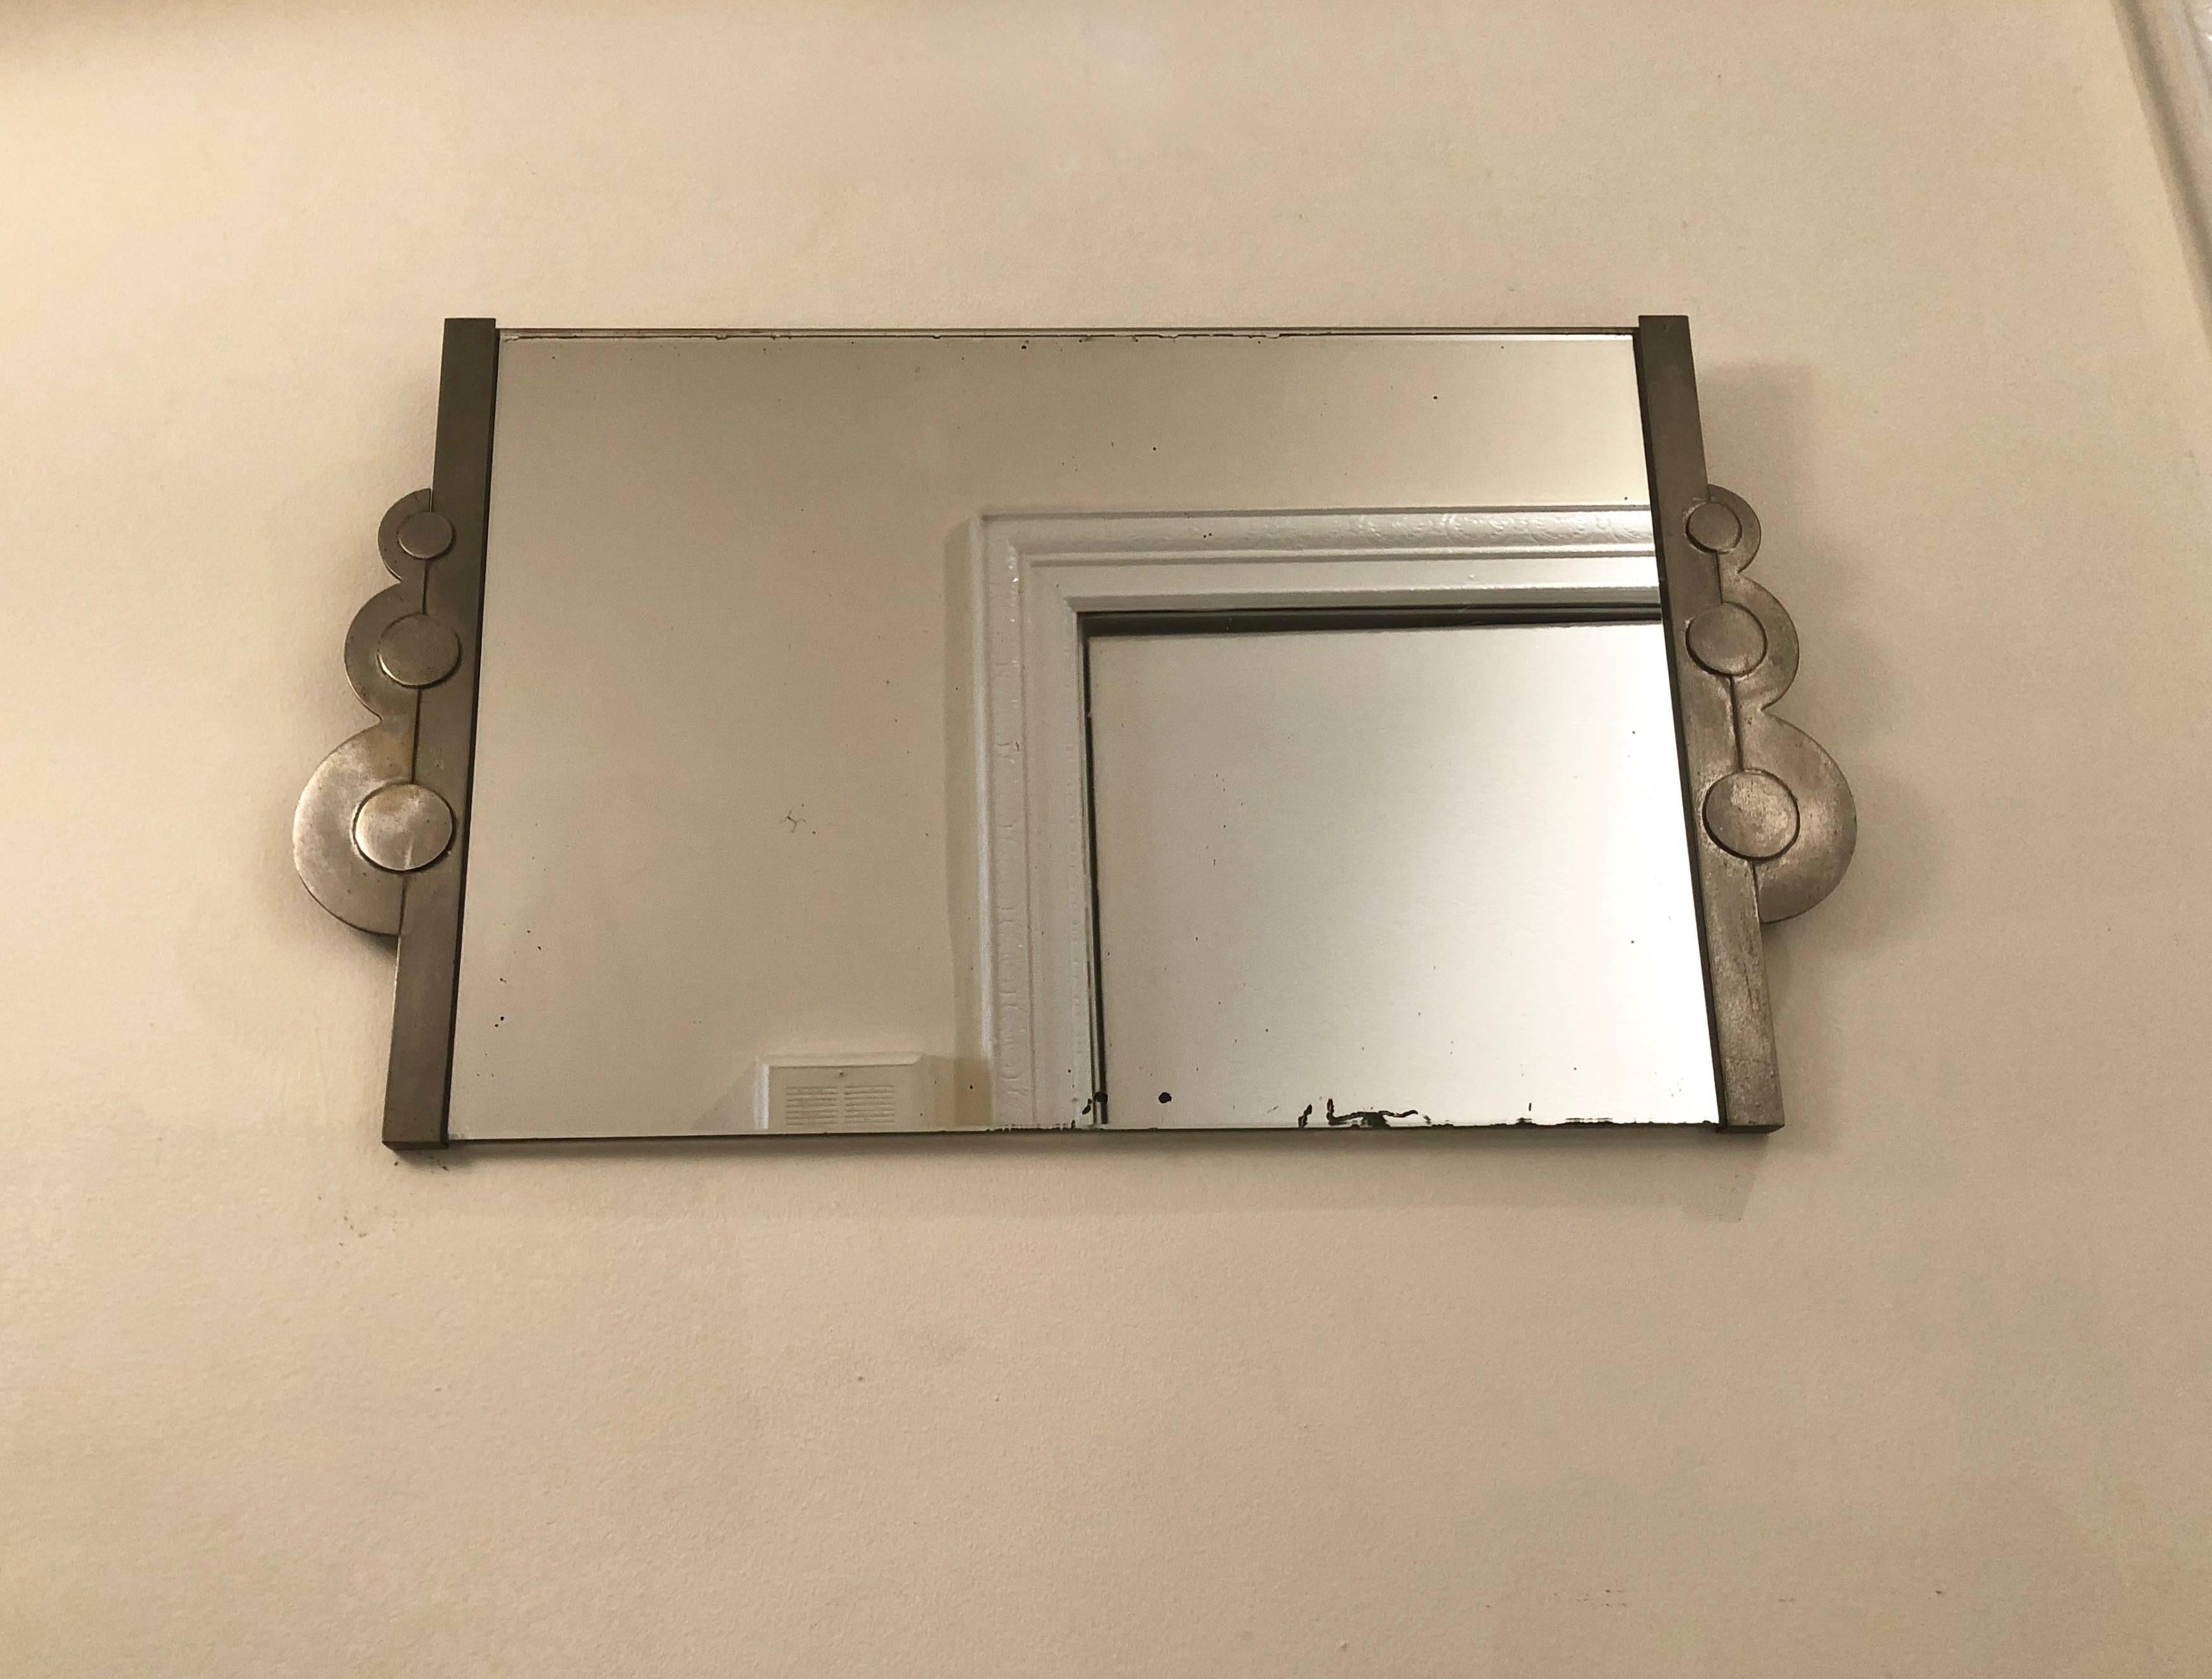 Rectangular American Deco wall mirror has a steel frame retaining its original patina and signs of original brass plating detail and slight aging marks on mirror.